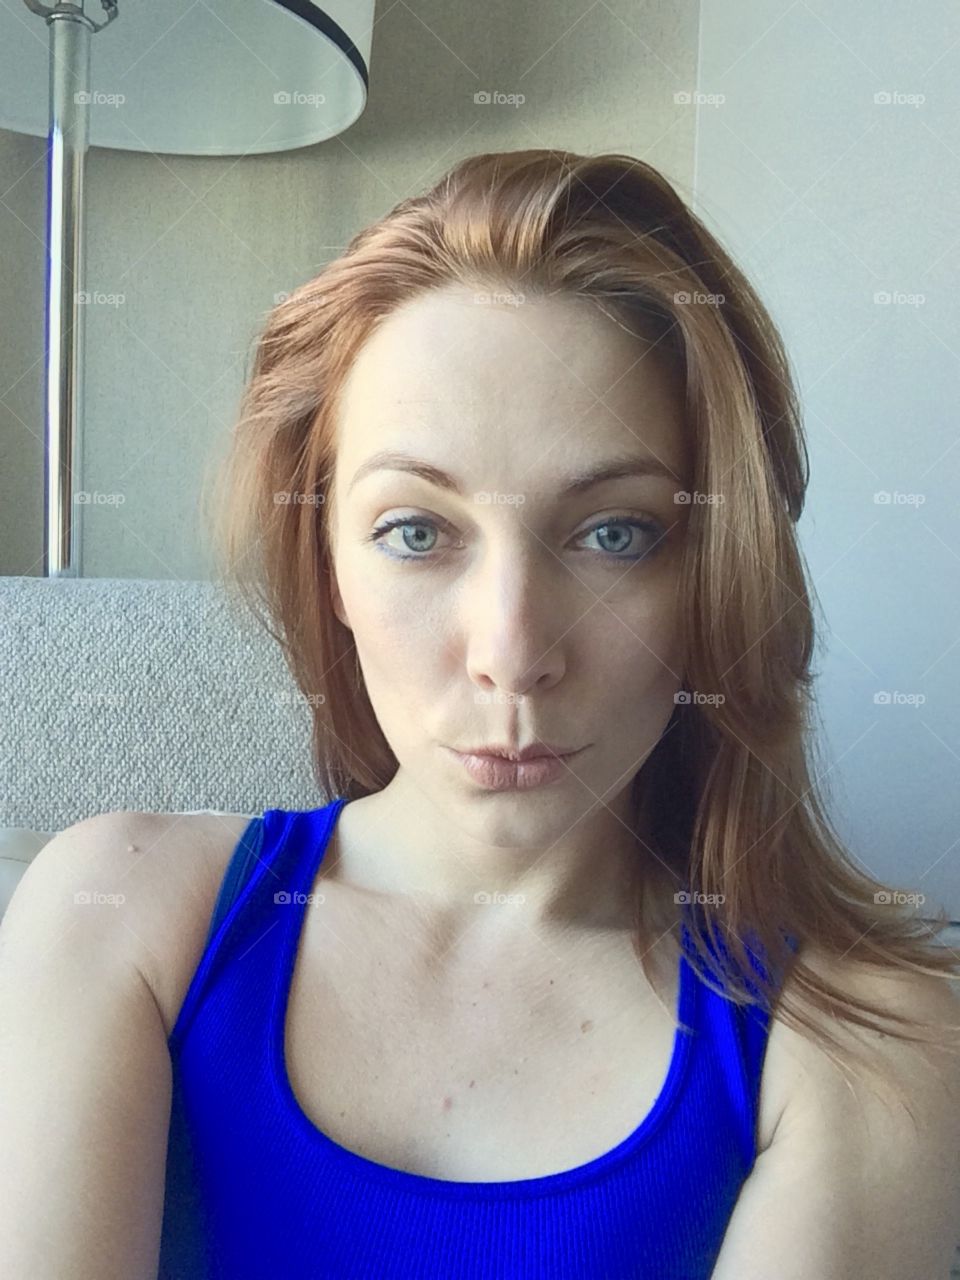 Big blue eyes, red hair, duck face pose selfie. Female model, long hair, tank top, lips pouted, sucked in cheeks.